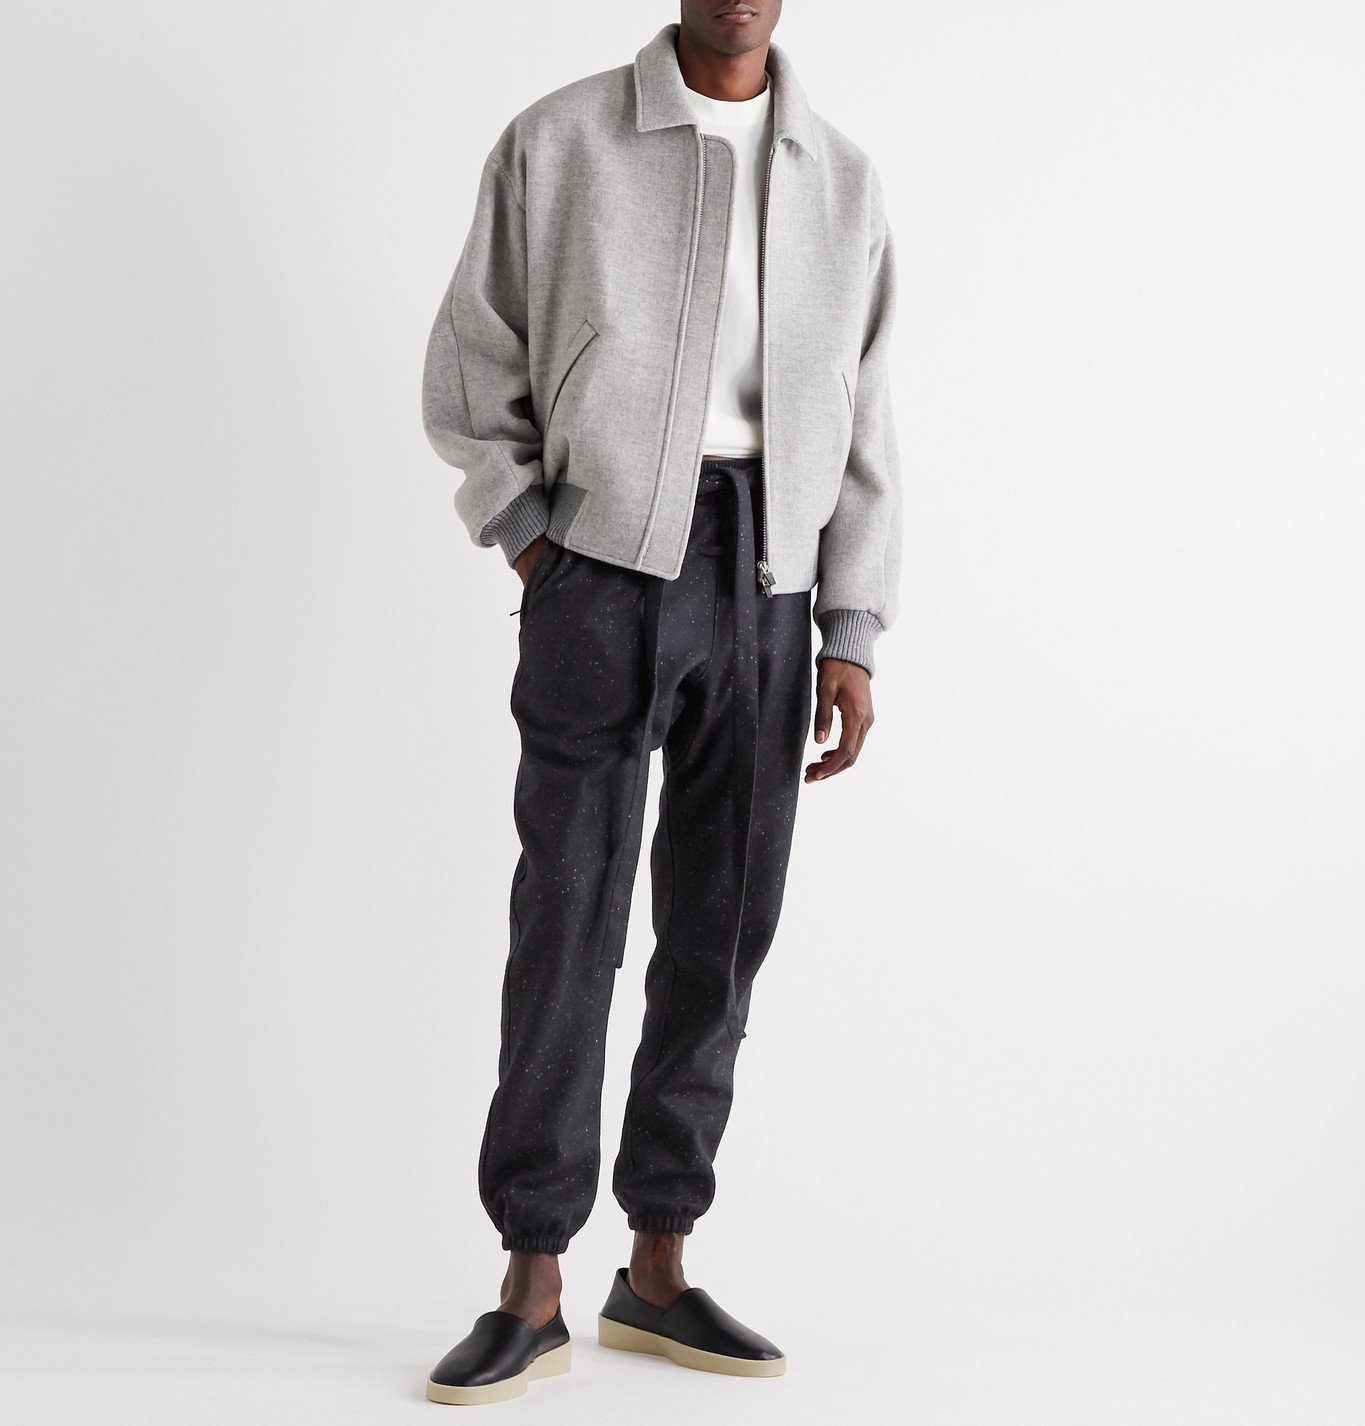 Fear of God and Zegna (and Louis Vuitton and Nigo) Welcome You to